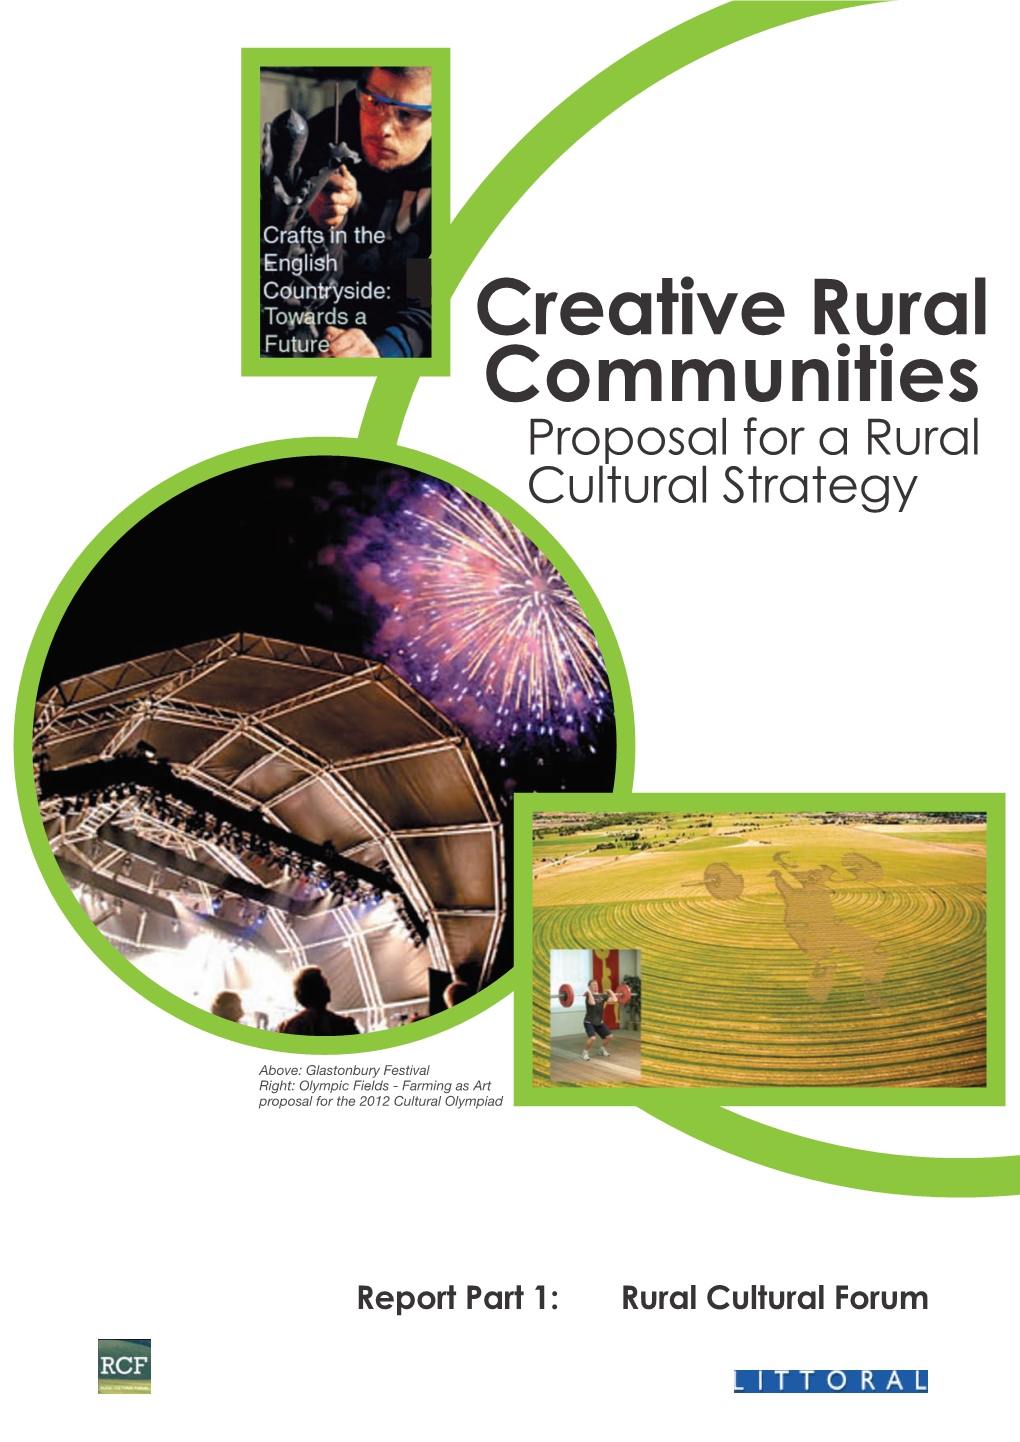 Creative Rural Communities Proposal for a Rural Cultural Strategy